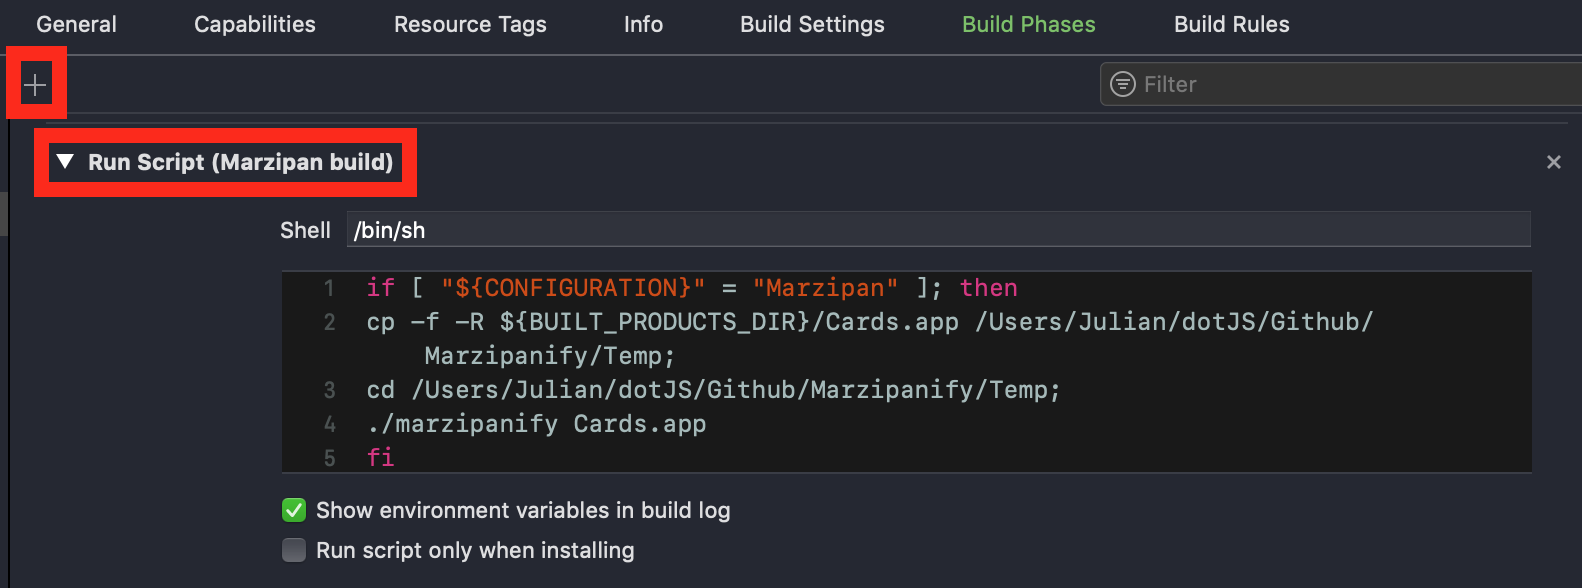 Screenshot of Xcode target settings in the build phases section with a red circle around the New Build Phase button.